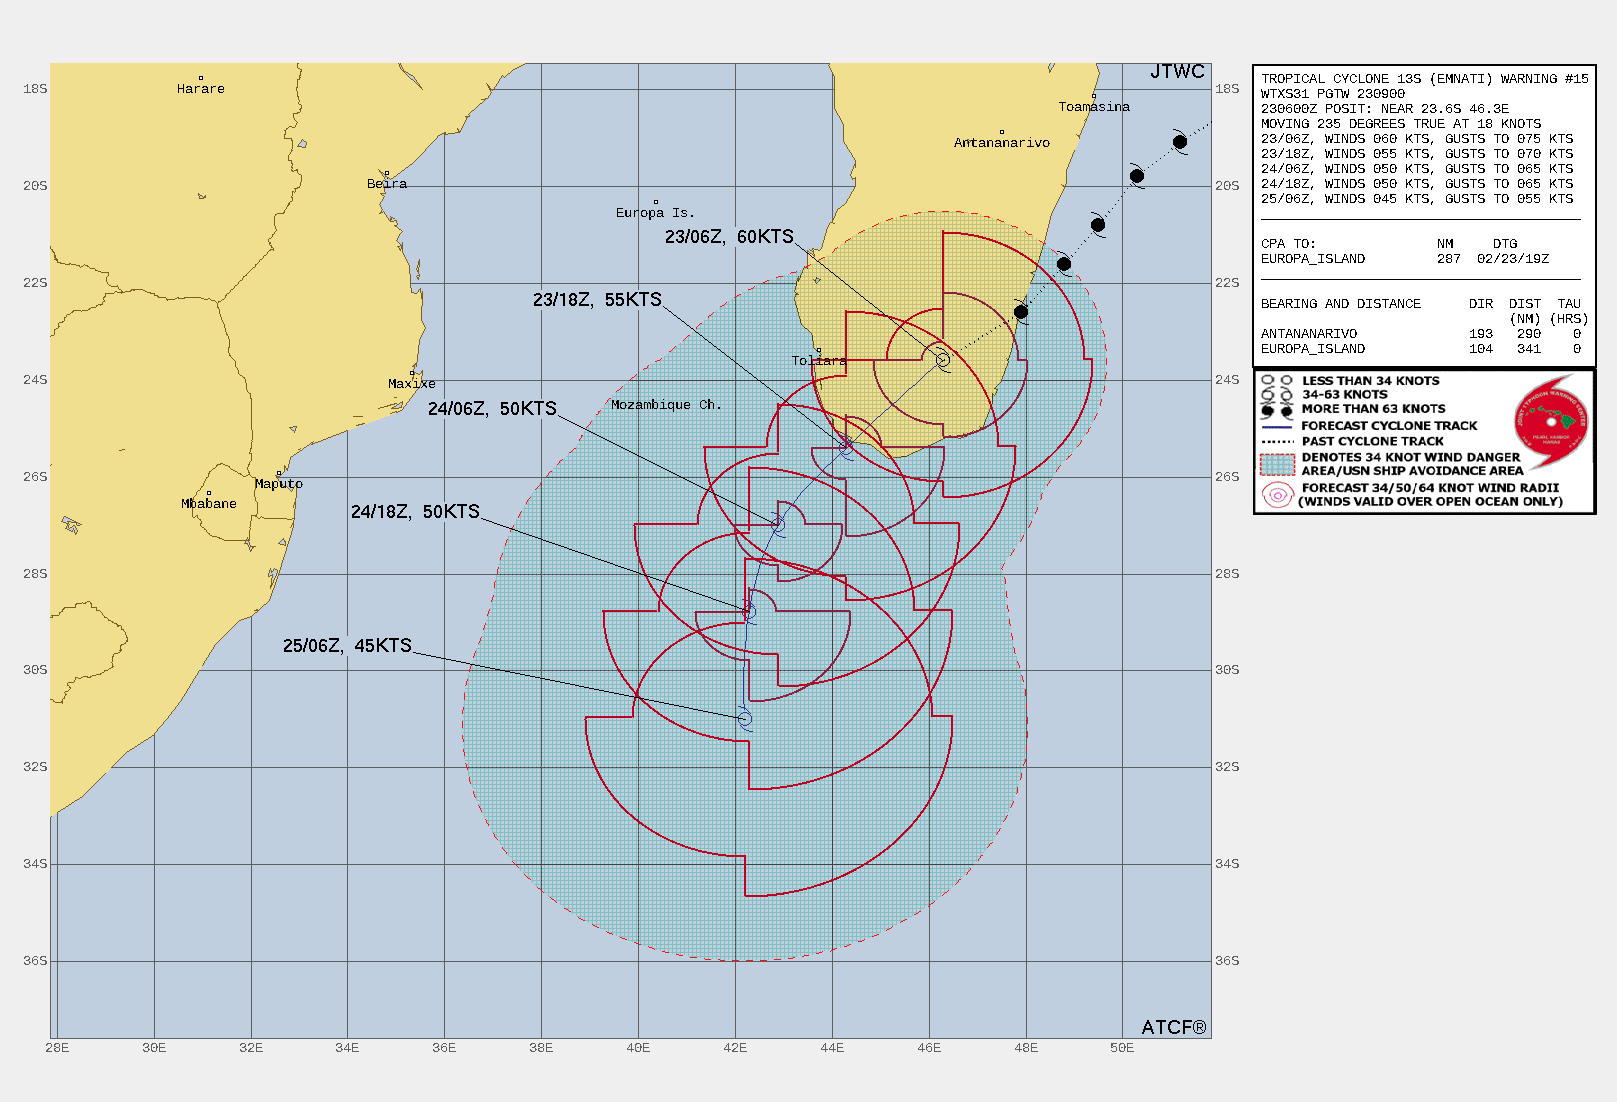 FORECAST REASONING.  SIGNIFICANT FORECAST CHANGES: THERE ARE NO SIGNIFICANT CHANGES TO THE FORECAST FROM THE PREVIOUS WARNING.  FORECAST DISCUSSION: TC 13S WILL CONTINUE ON ITS CURRENT SOUTHWESTWARD TRACK UNDER THE STEERING INFLUENCE OF THE STR AND EXIT INTO THE MOZAMBIQUE CHANNEL JUST BEFORE 12H. AFTER 24H, IT  WILL TRACK MORE SOUTHWARD AS IT ROUNDS THE WESTERN EDGE OF THE SUBTROPICAL RIDGE (STR).  INTERACTION WITH THE RUGGED TERRAIN, THEN THE COOLER (24C) SST AND  STRONG (30KT+) VWS, OFFSET BY STRONG POLEWARD OUTFLOW IN THE  MOZAMBIQUE CHANNEL WILL RESULT IN GRADUAL DECAY - DOWN TO 45KTS BY TAU  48. CONCURRENTLY BY 36H, TC 13S WILL BEGIN SUBTROPICAL TRANSITION  AND BY 48H, WILL TRANSFORM INTO A SUBTROPICAL SYSTEM WITH AN  EXPANDING WIND FIELD.